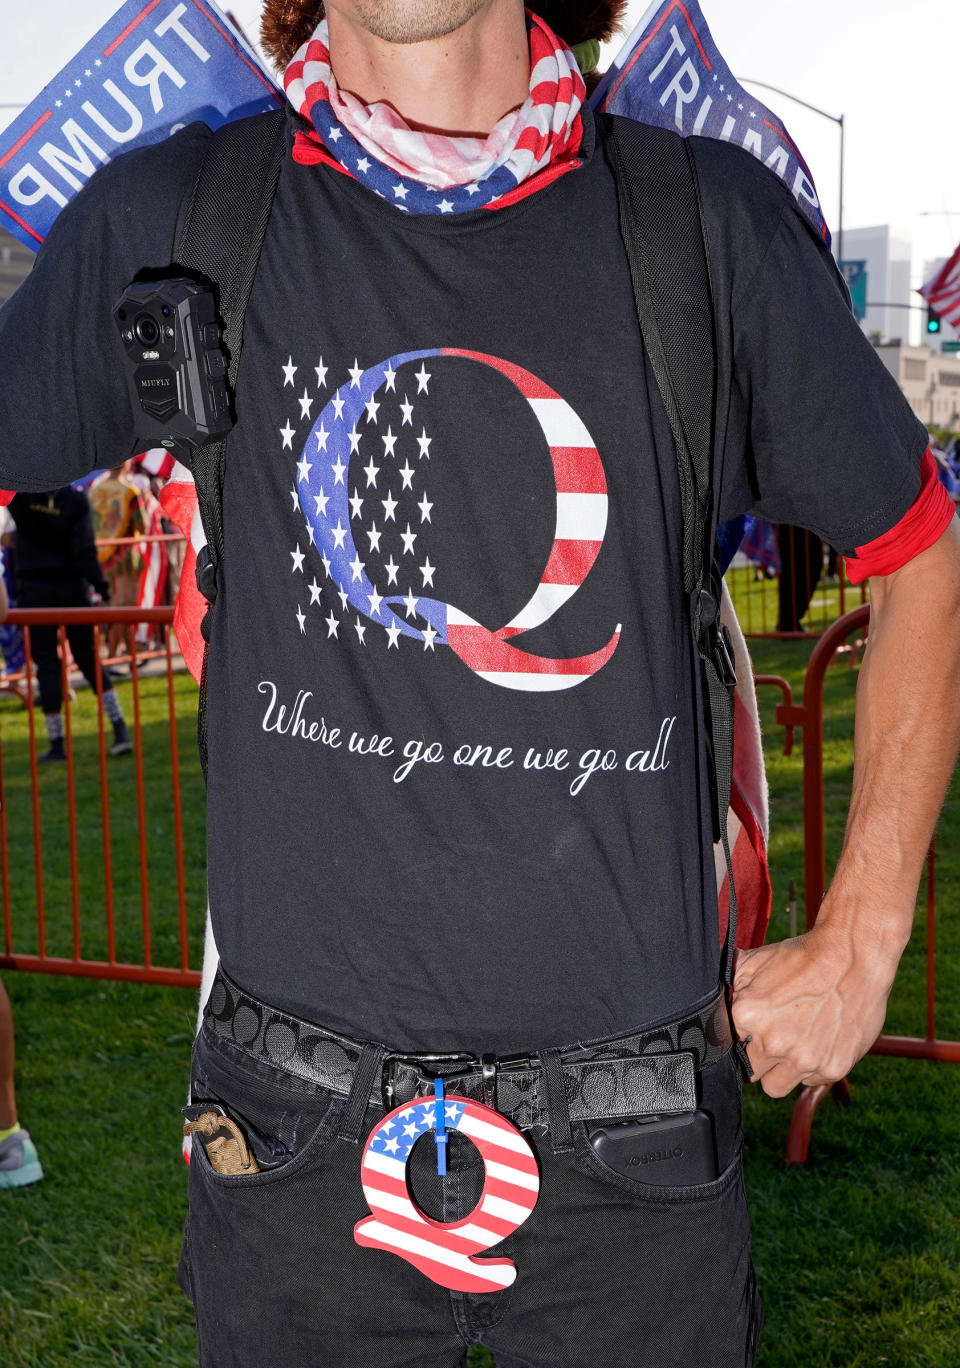 A QAnon shirt at a Trump rally in Beverly Hills, Calif., Oct. 10, 2020.<span class="copyright">Jamie Lee Curtis Taete</span>